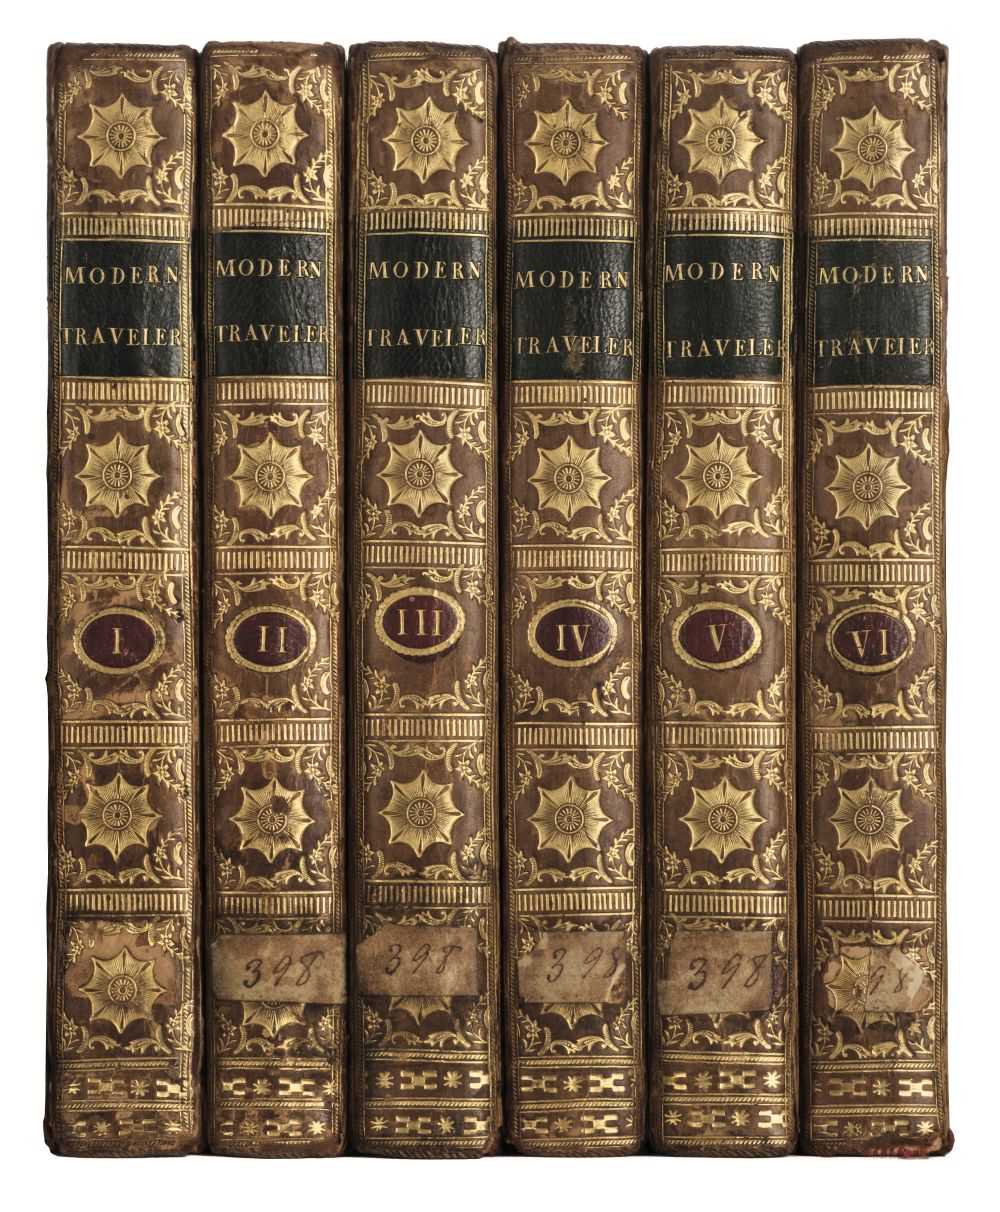 Lot 12 - Modern Traveller. Being a Collection of Useful and Entertaining Travels, 6 vols., 1776-77